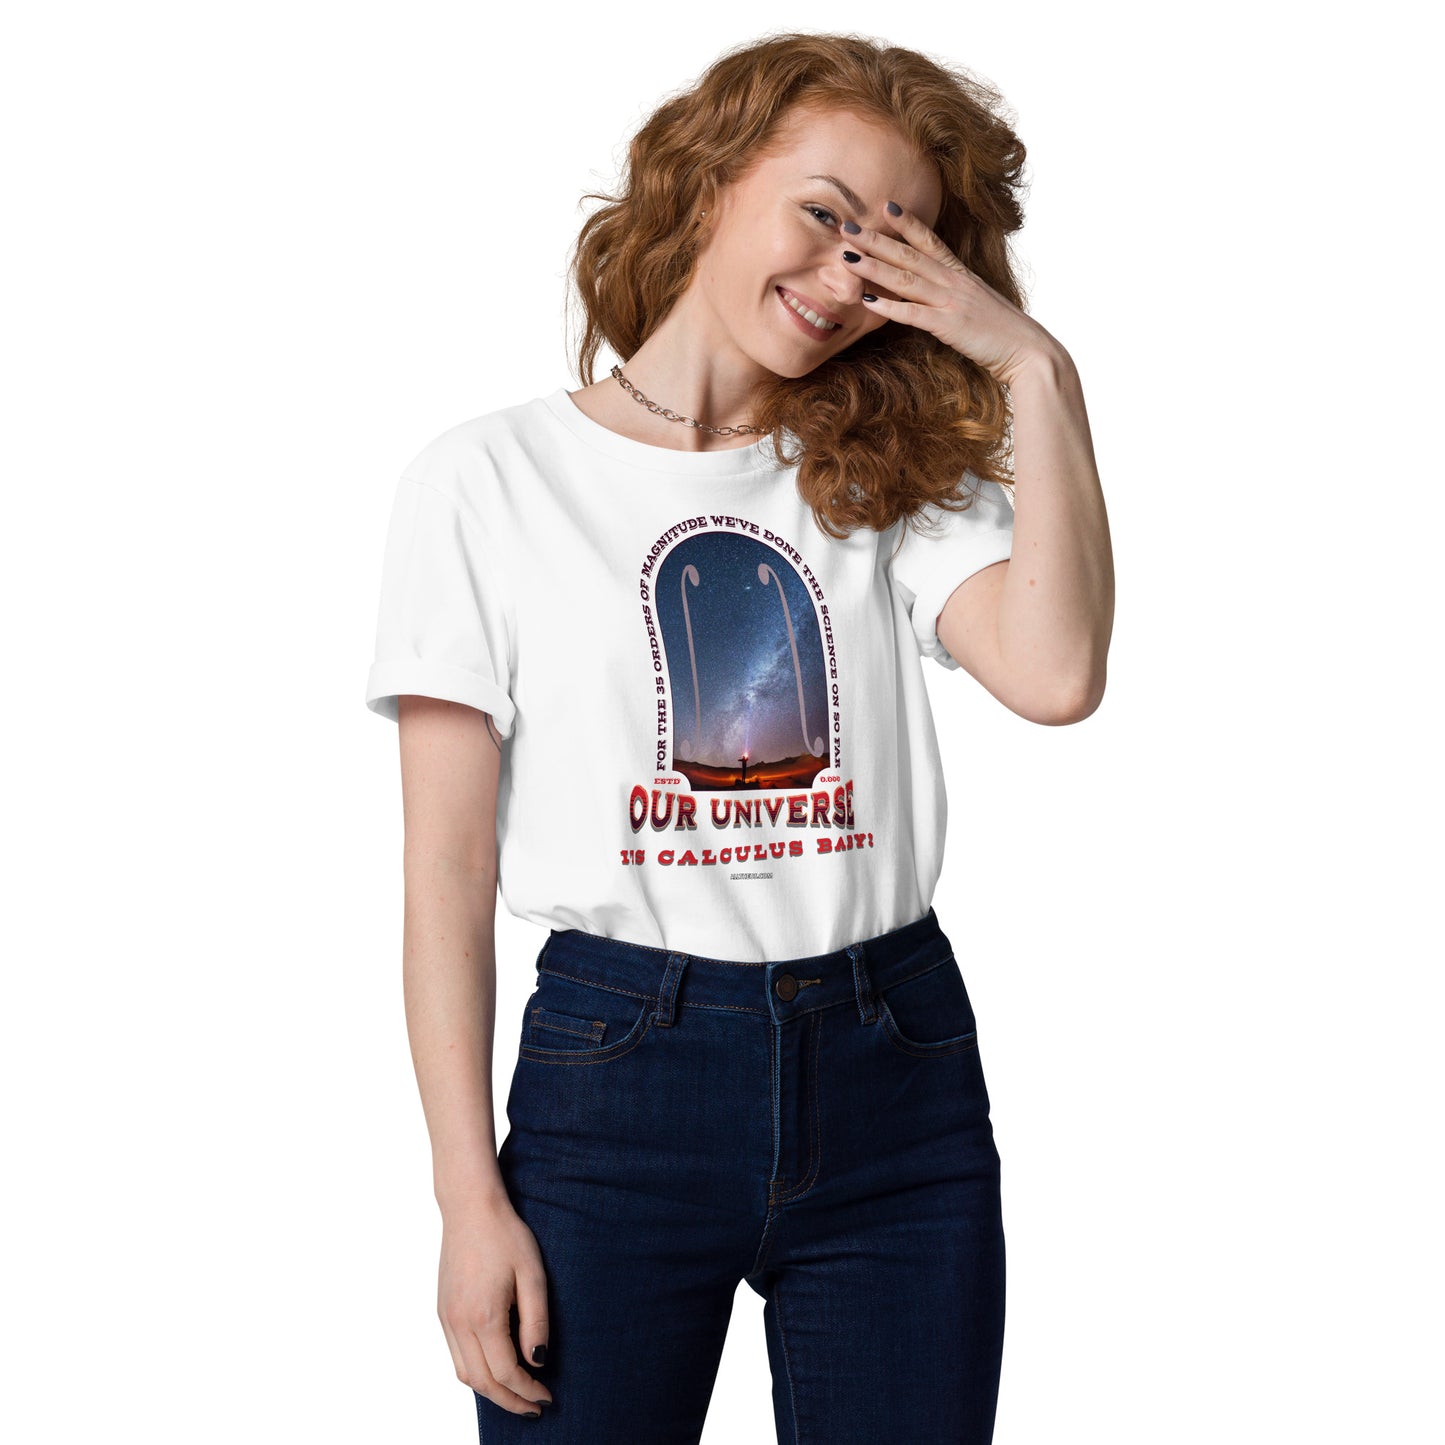 Unisex organic cotton t-shirt - Our Bonkers Universe, Its Calculus Baby!